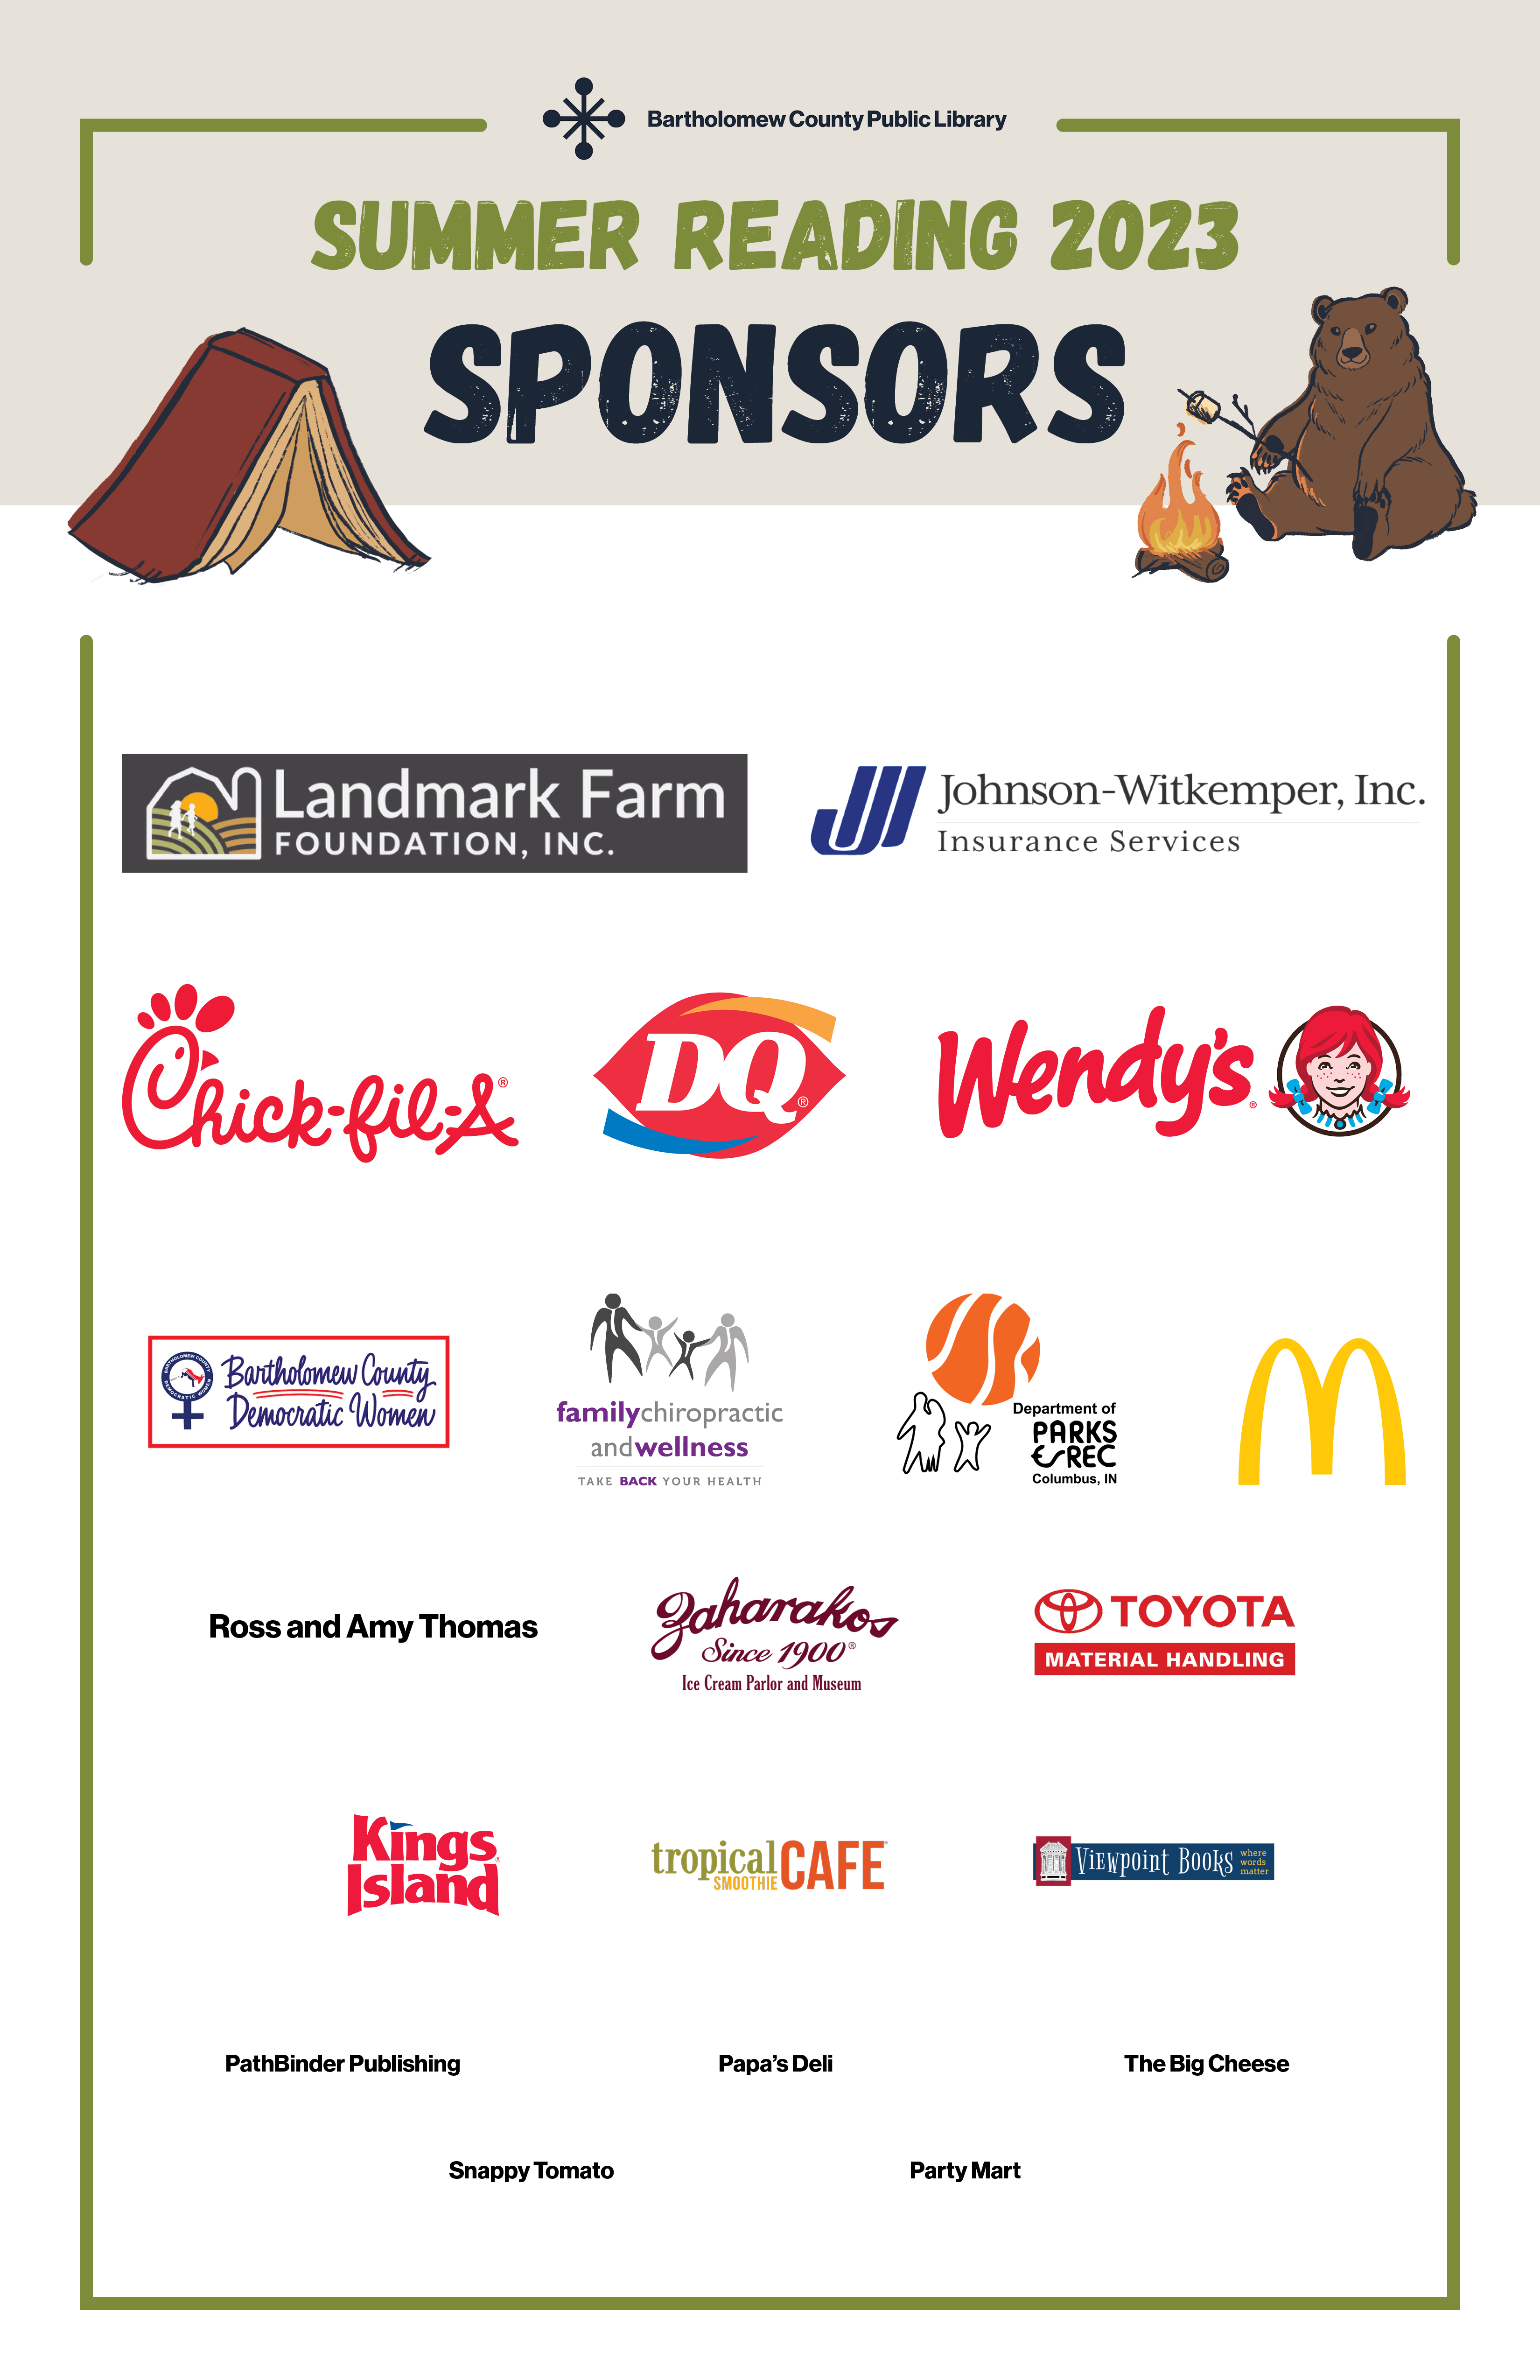 Summer Reading Sponsors of 2023: Landmark Farm Foundation Johnson-Witkemper, Inc. Insurance Services  Chick-fil-A Columbus National  Dairy Queen Wendy's Bartholomew County Democratic Women  Family Chiropractic and Wellness  Columbus, Indiana Parks and Recreation Department  McDonald's Ross and Amy Thomas Zaharakos  Toyota Forklift  Tropical Smoothie Cafe  Viewpoint Books  PathBinder Publishing LLC  Papa's Grill  The Big Cheese  Snappy Tomato Pizza - Columbus East  The Original Party Mart  Donut Central  Texas Roadhouse